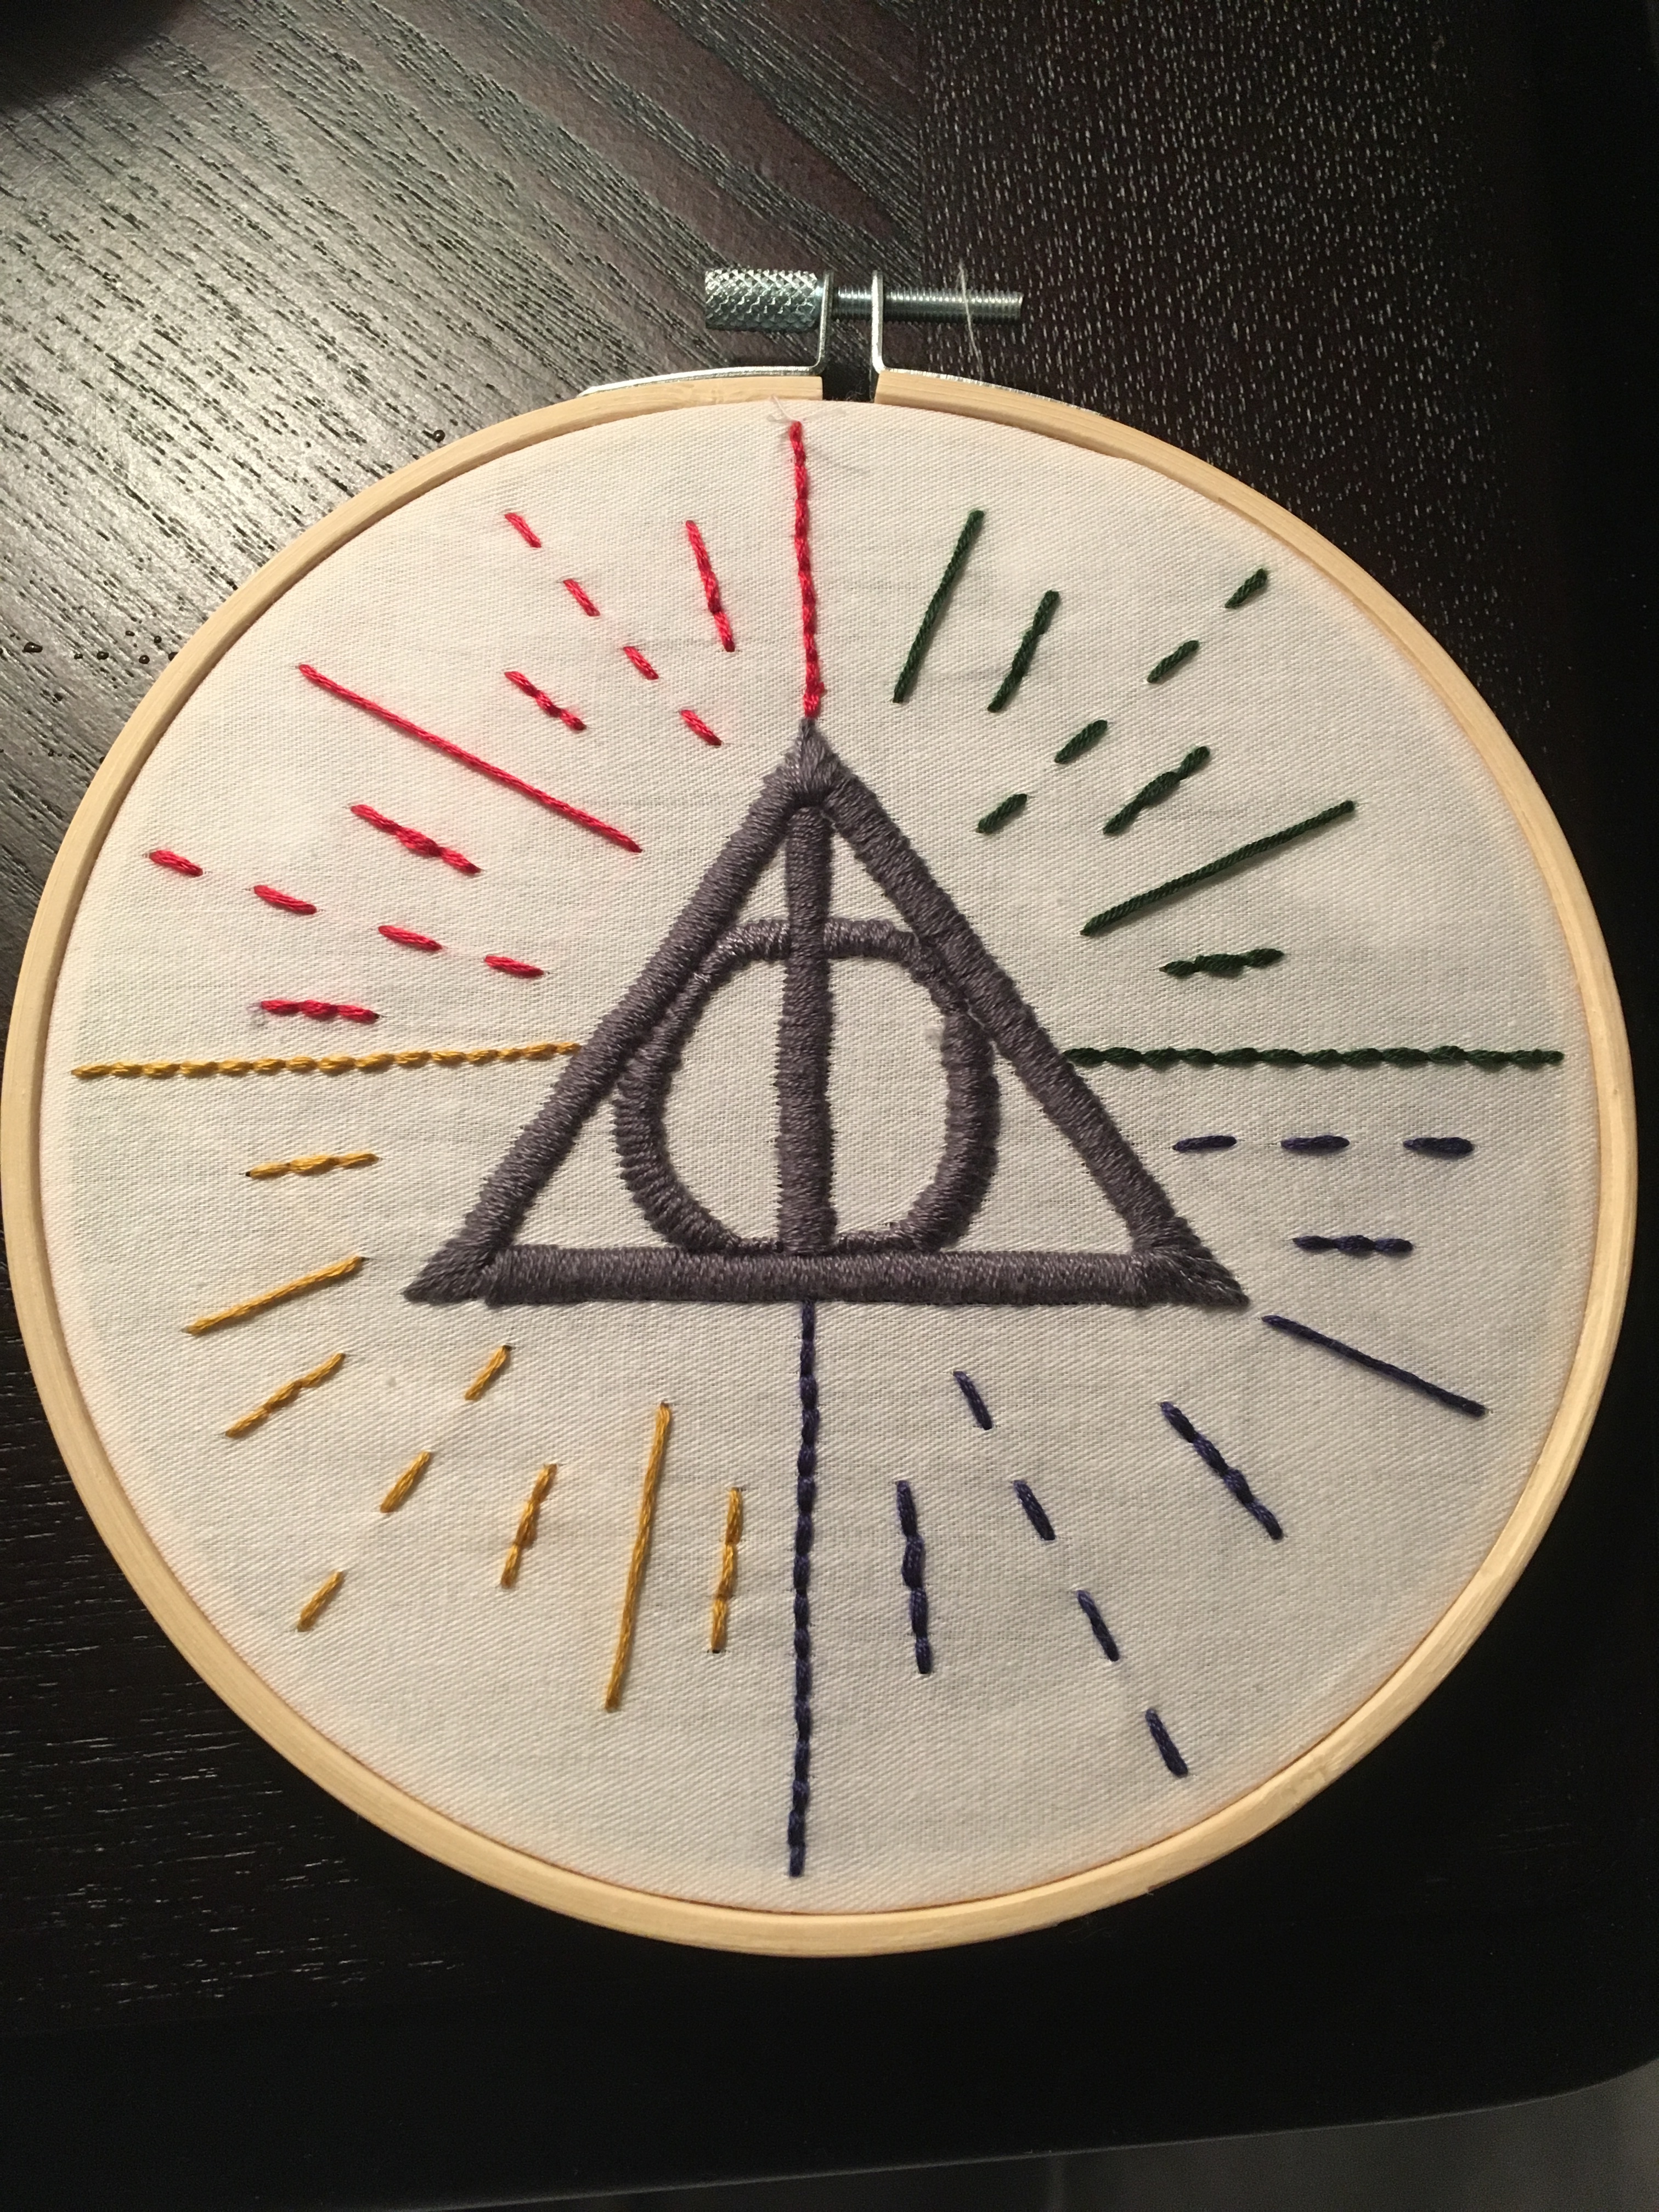 the deathly hallows triangle with red, blue, green, and yellow decorations